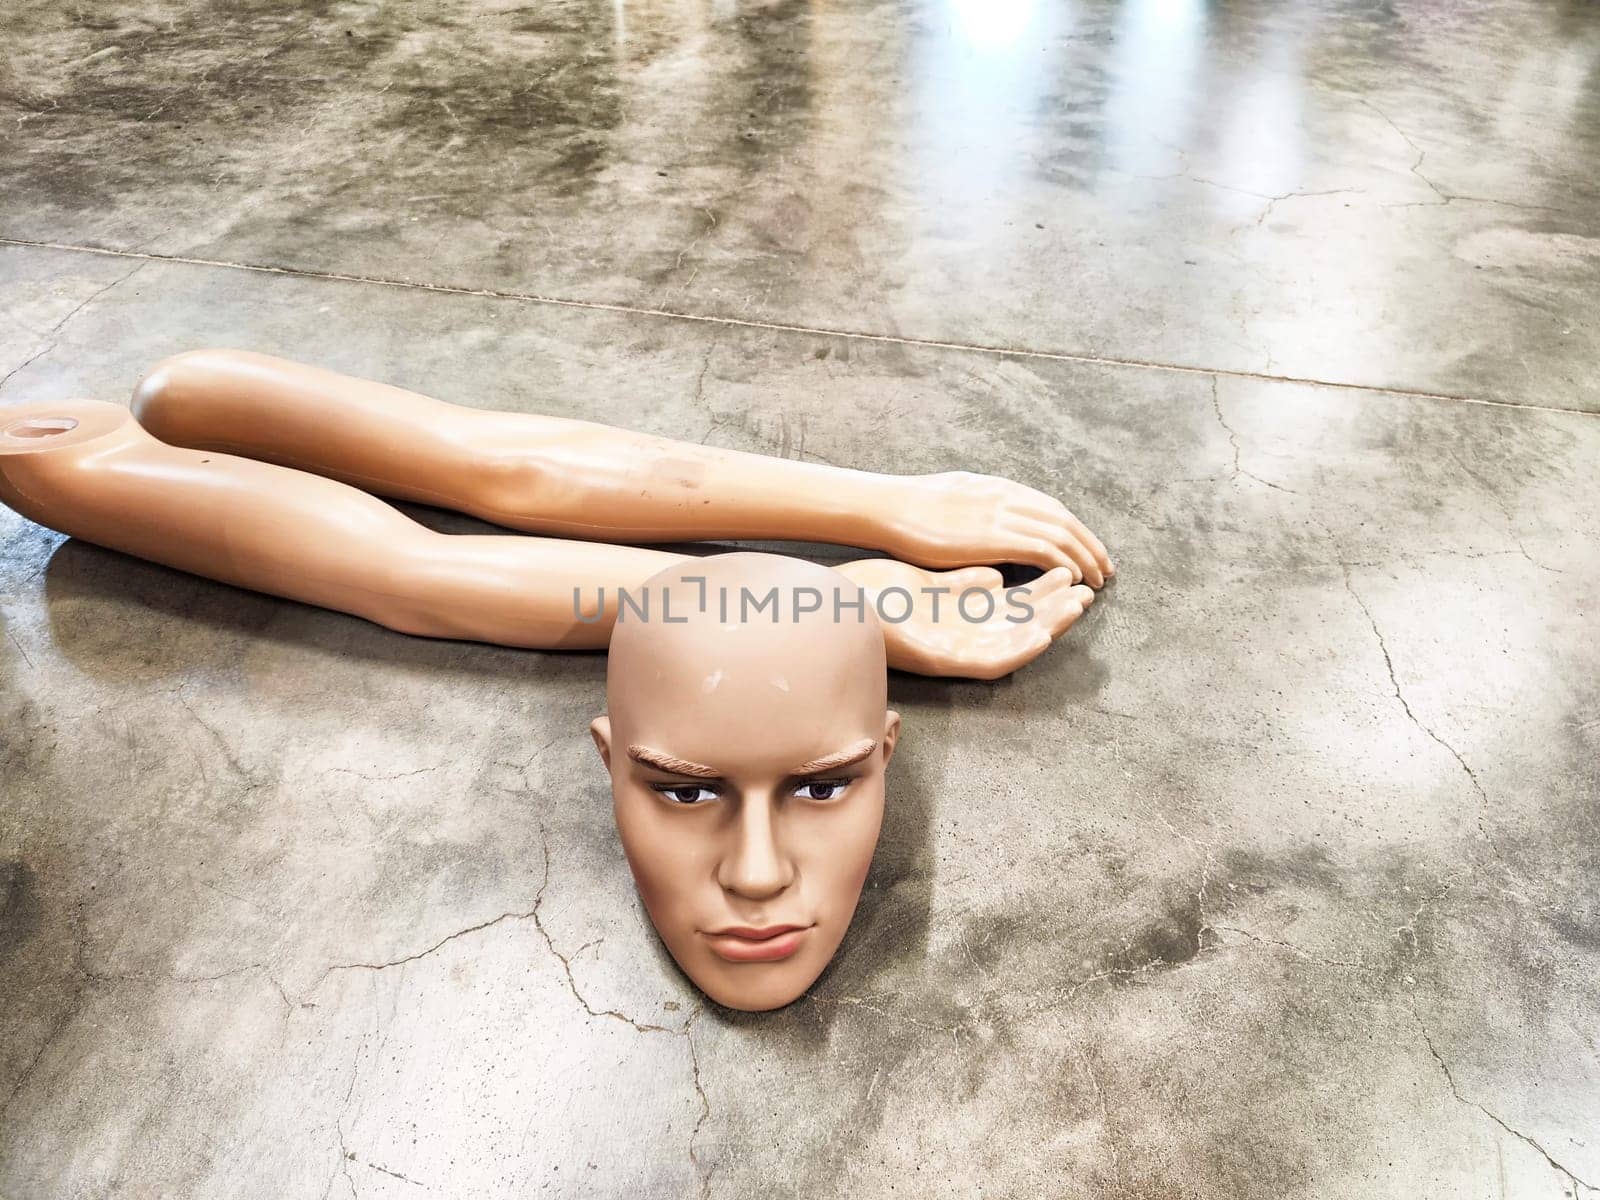 Disassembled Mannequin on Concrete Floor. Mannequin parts scattered on polished surface